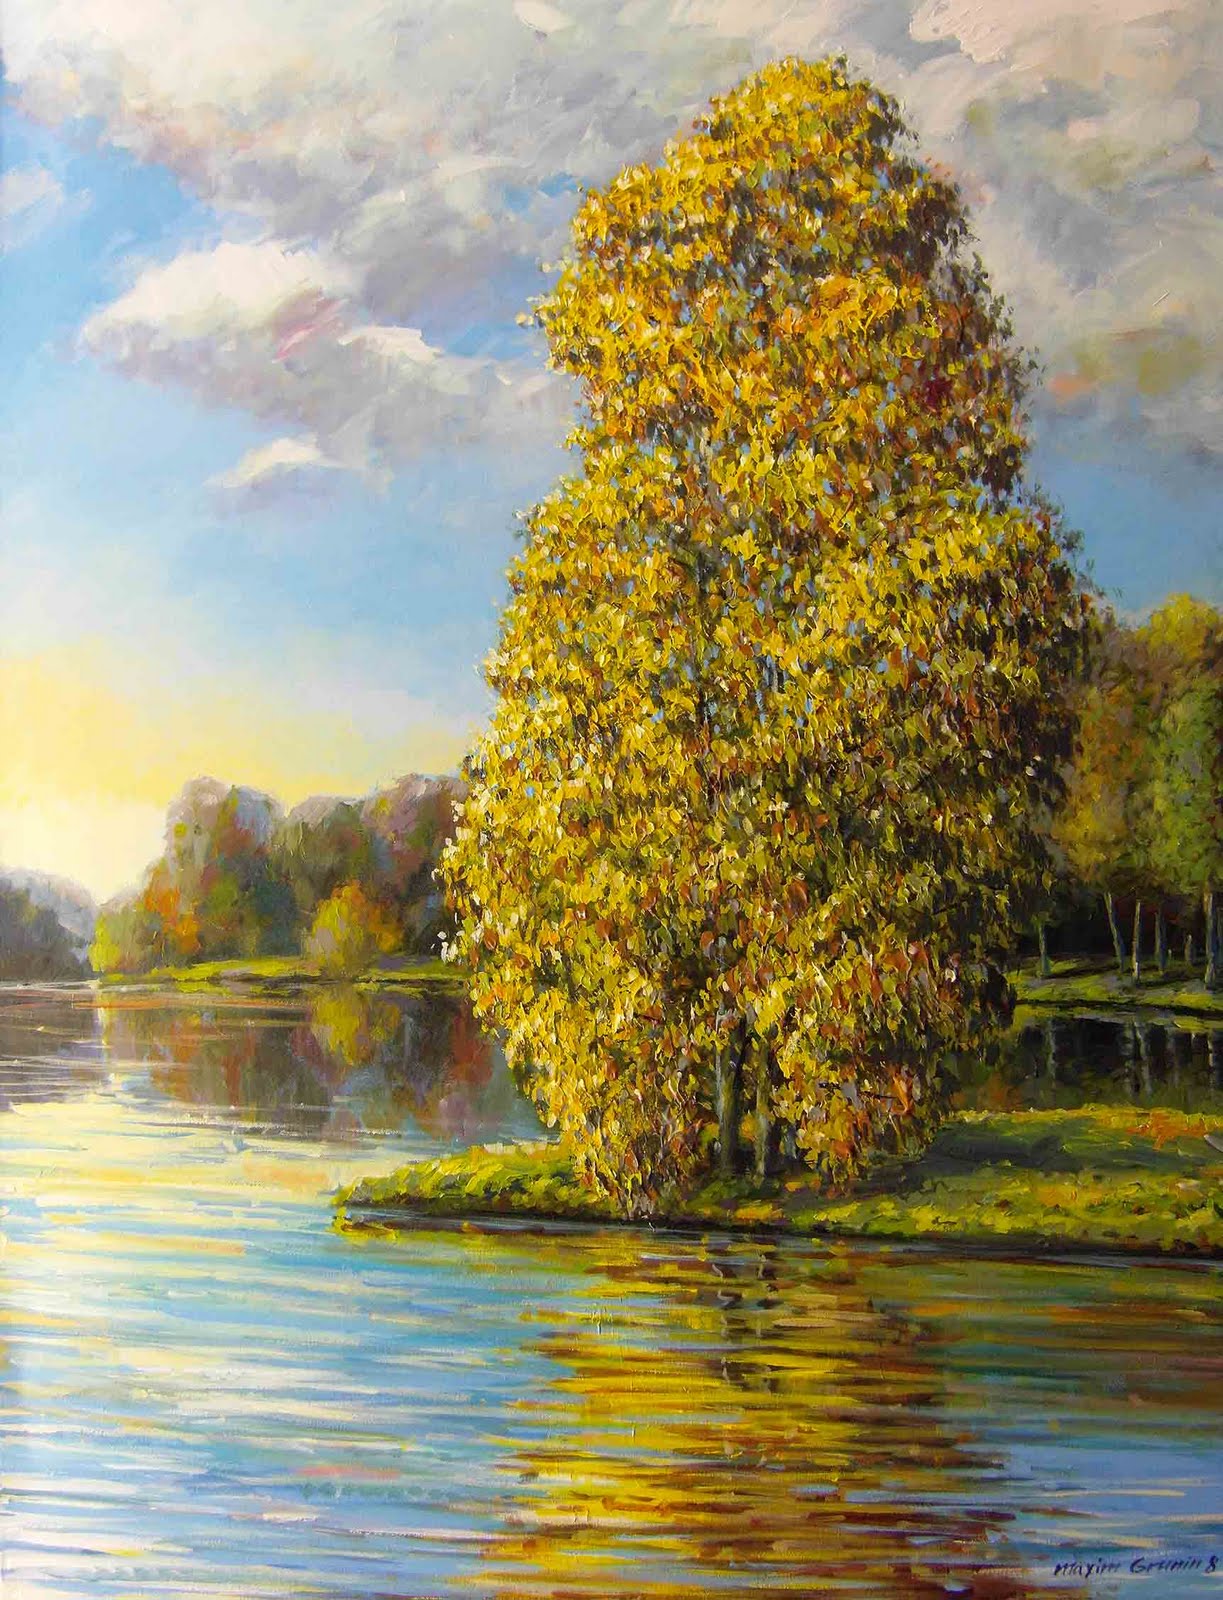 Maxim Grunin Drawing & Painting: Landscape paintings 2010